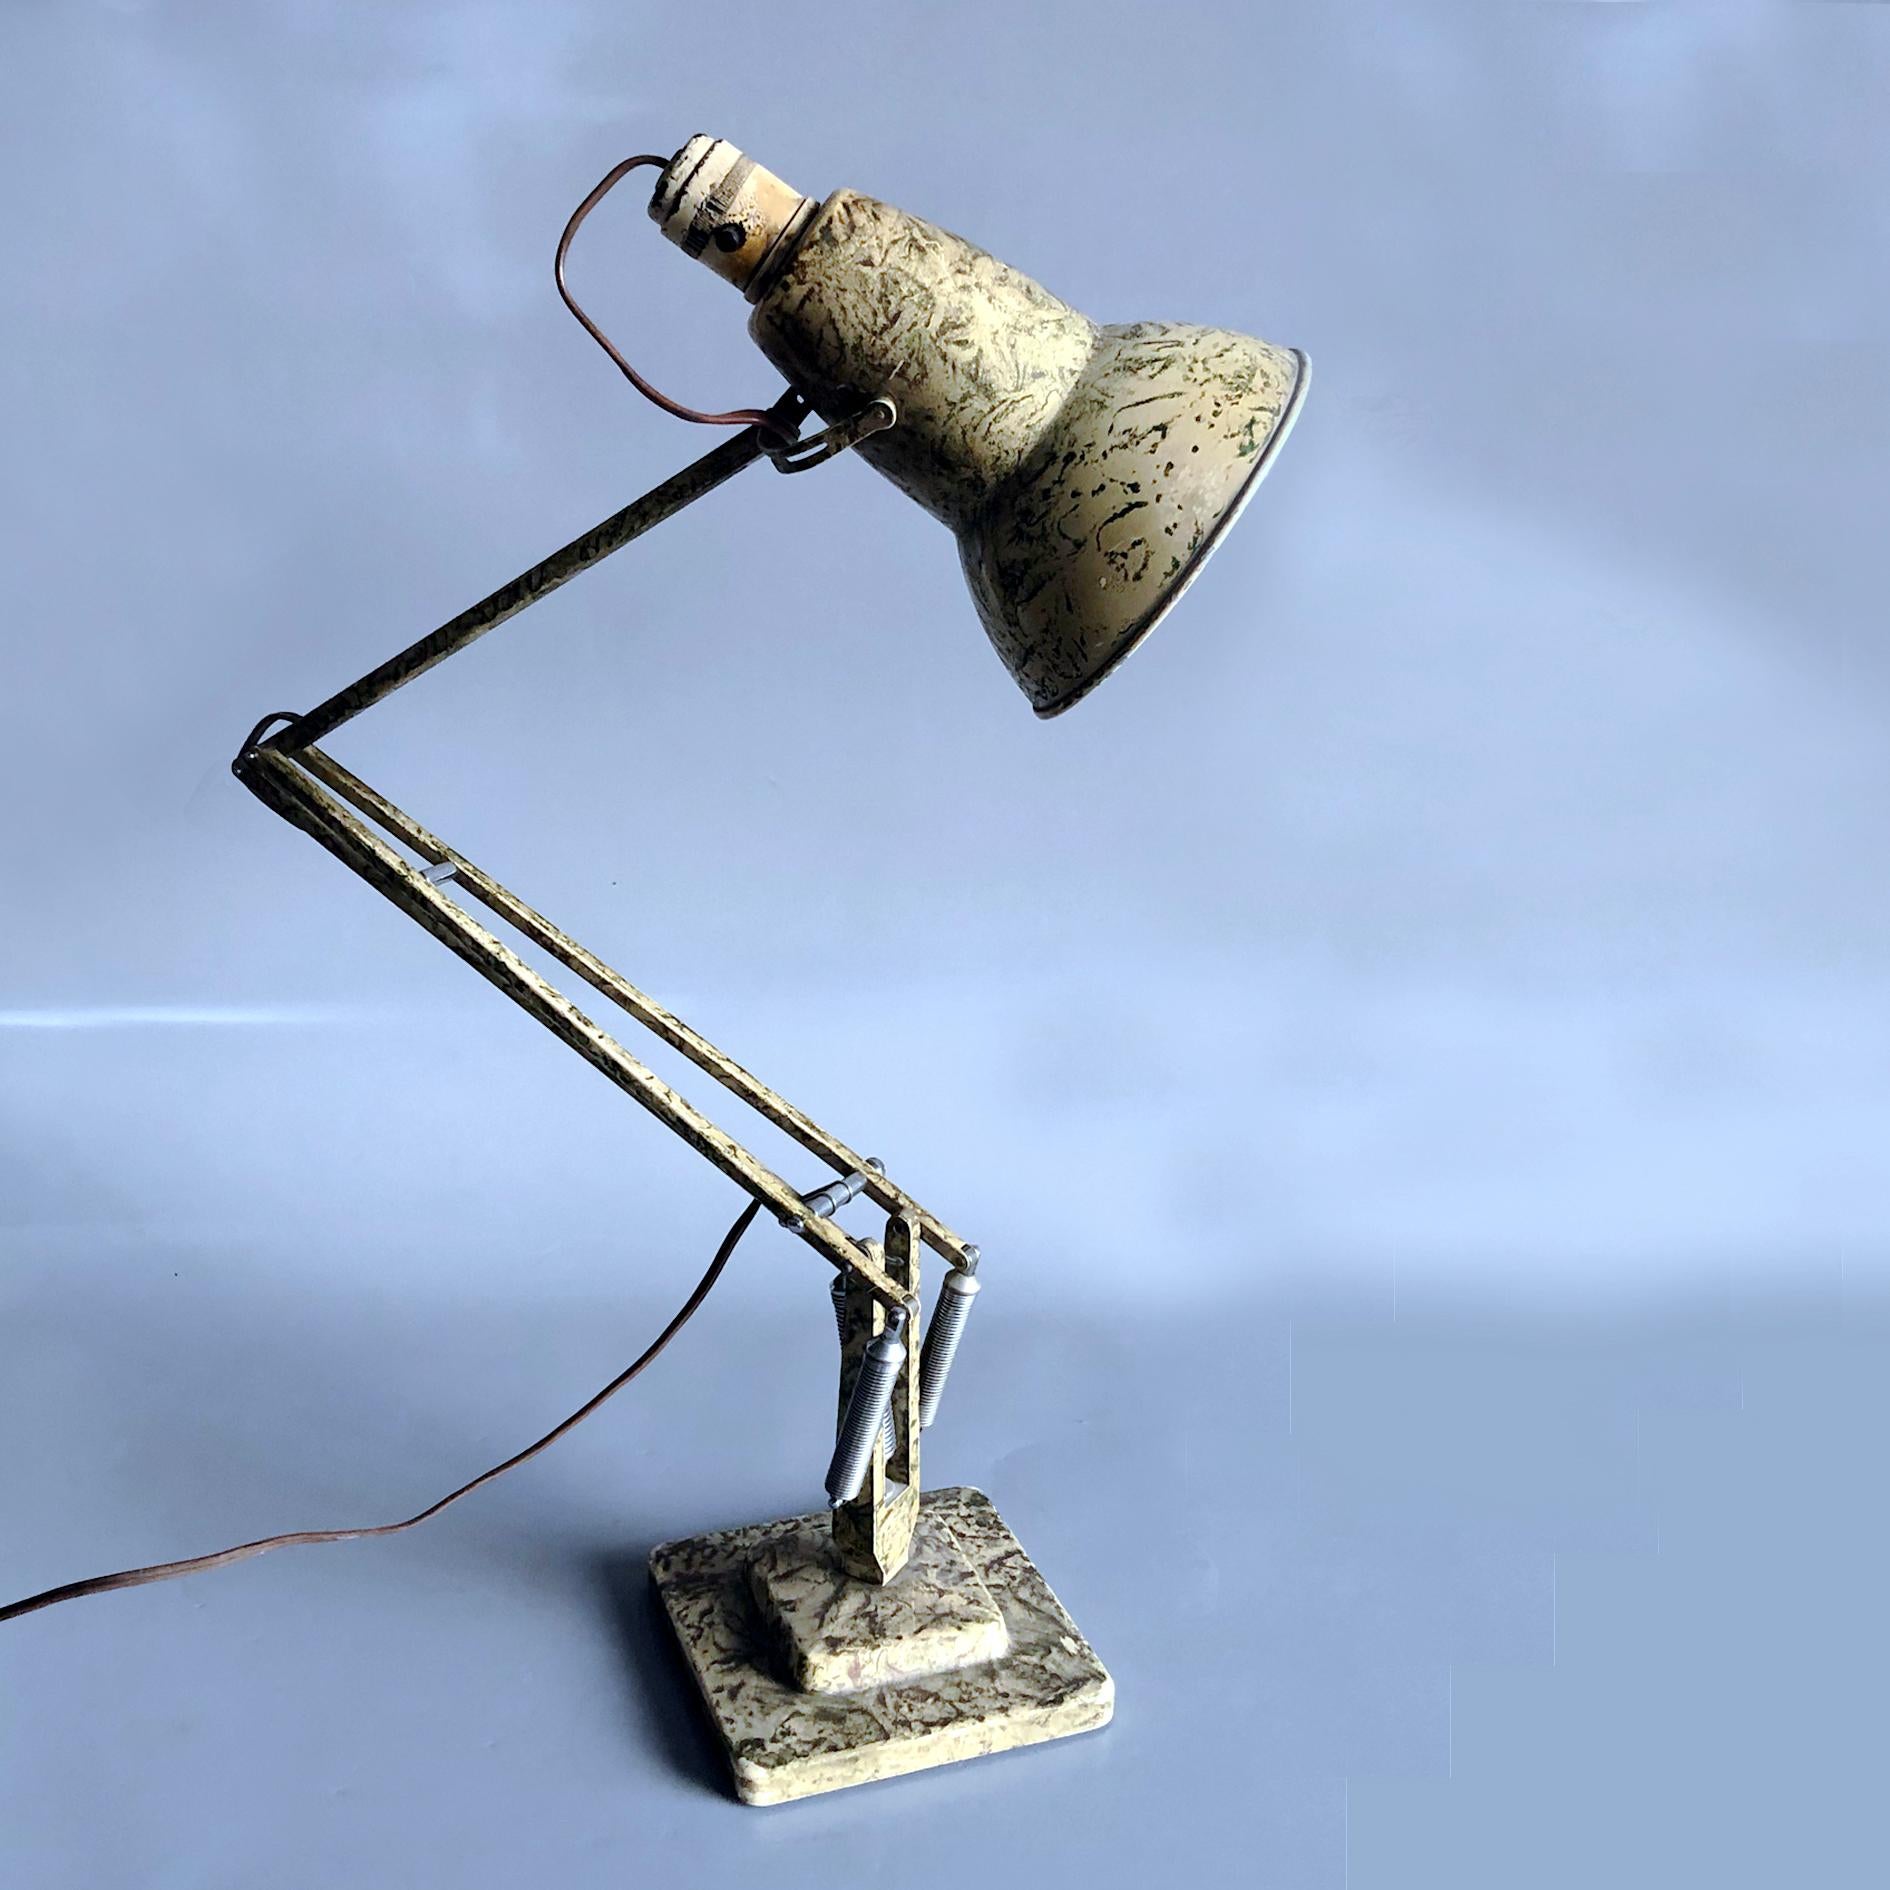 Herbert Terry Anglepoise adjustable lamp model 1227 designed by George Carwardine and made from 1938. Maker name is casted into the fork. The Scumble paint finish is original, has light patina and expected signs of age.
Dimensions: Base size: 15 cm